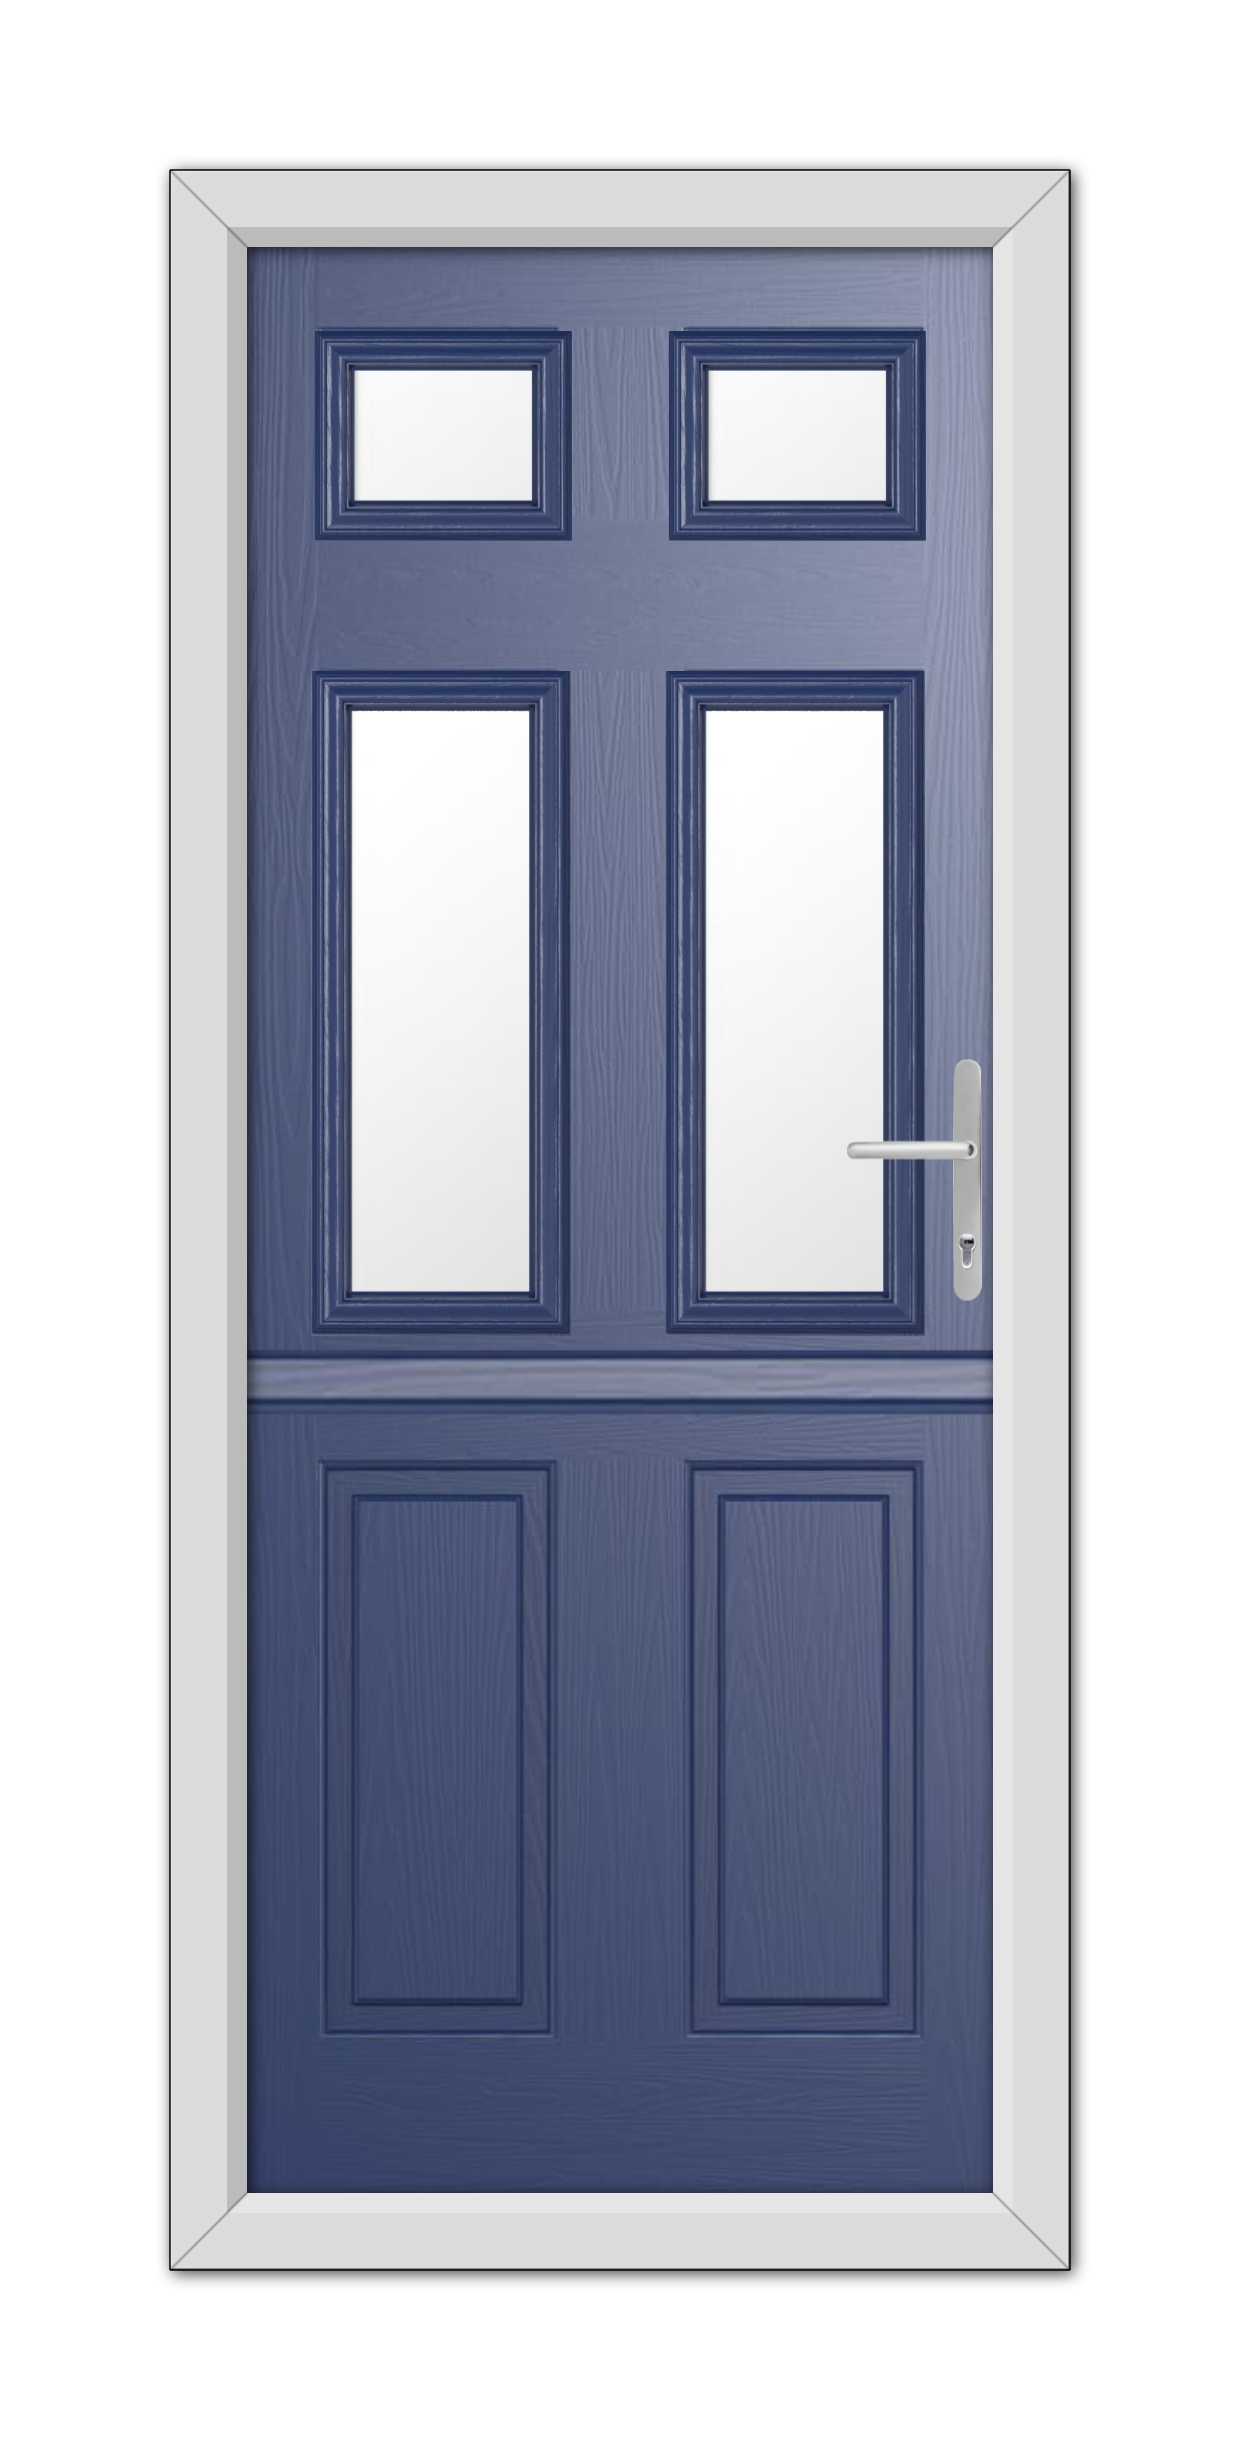 Double entrance door in Blue Middleton Glazed 4 Stable Composite Door 48mm Timber Core with four rectangular panels, two of which include windows, and a modern handle, isolated on a white background.